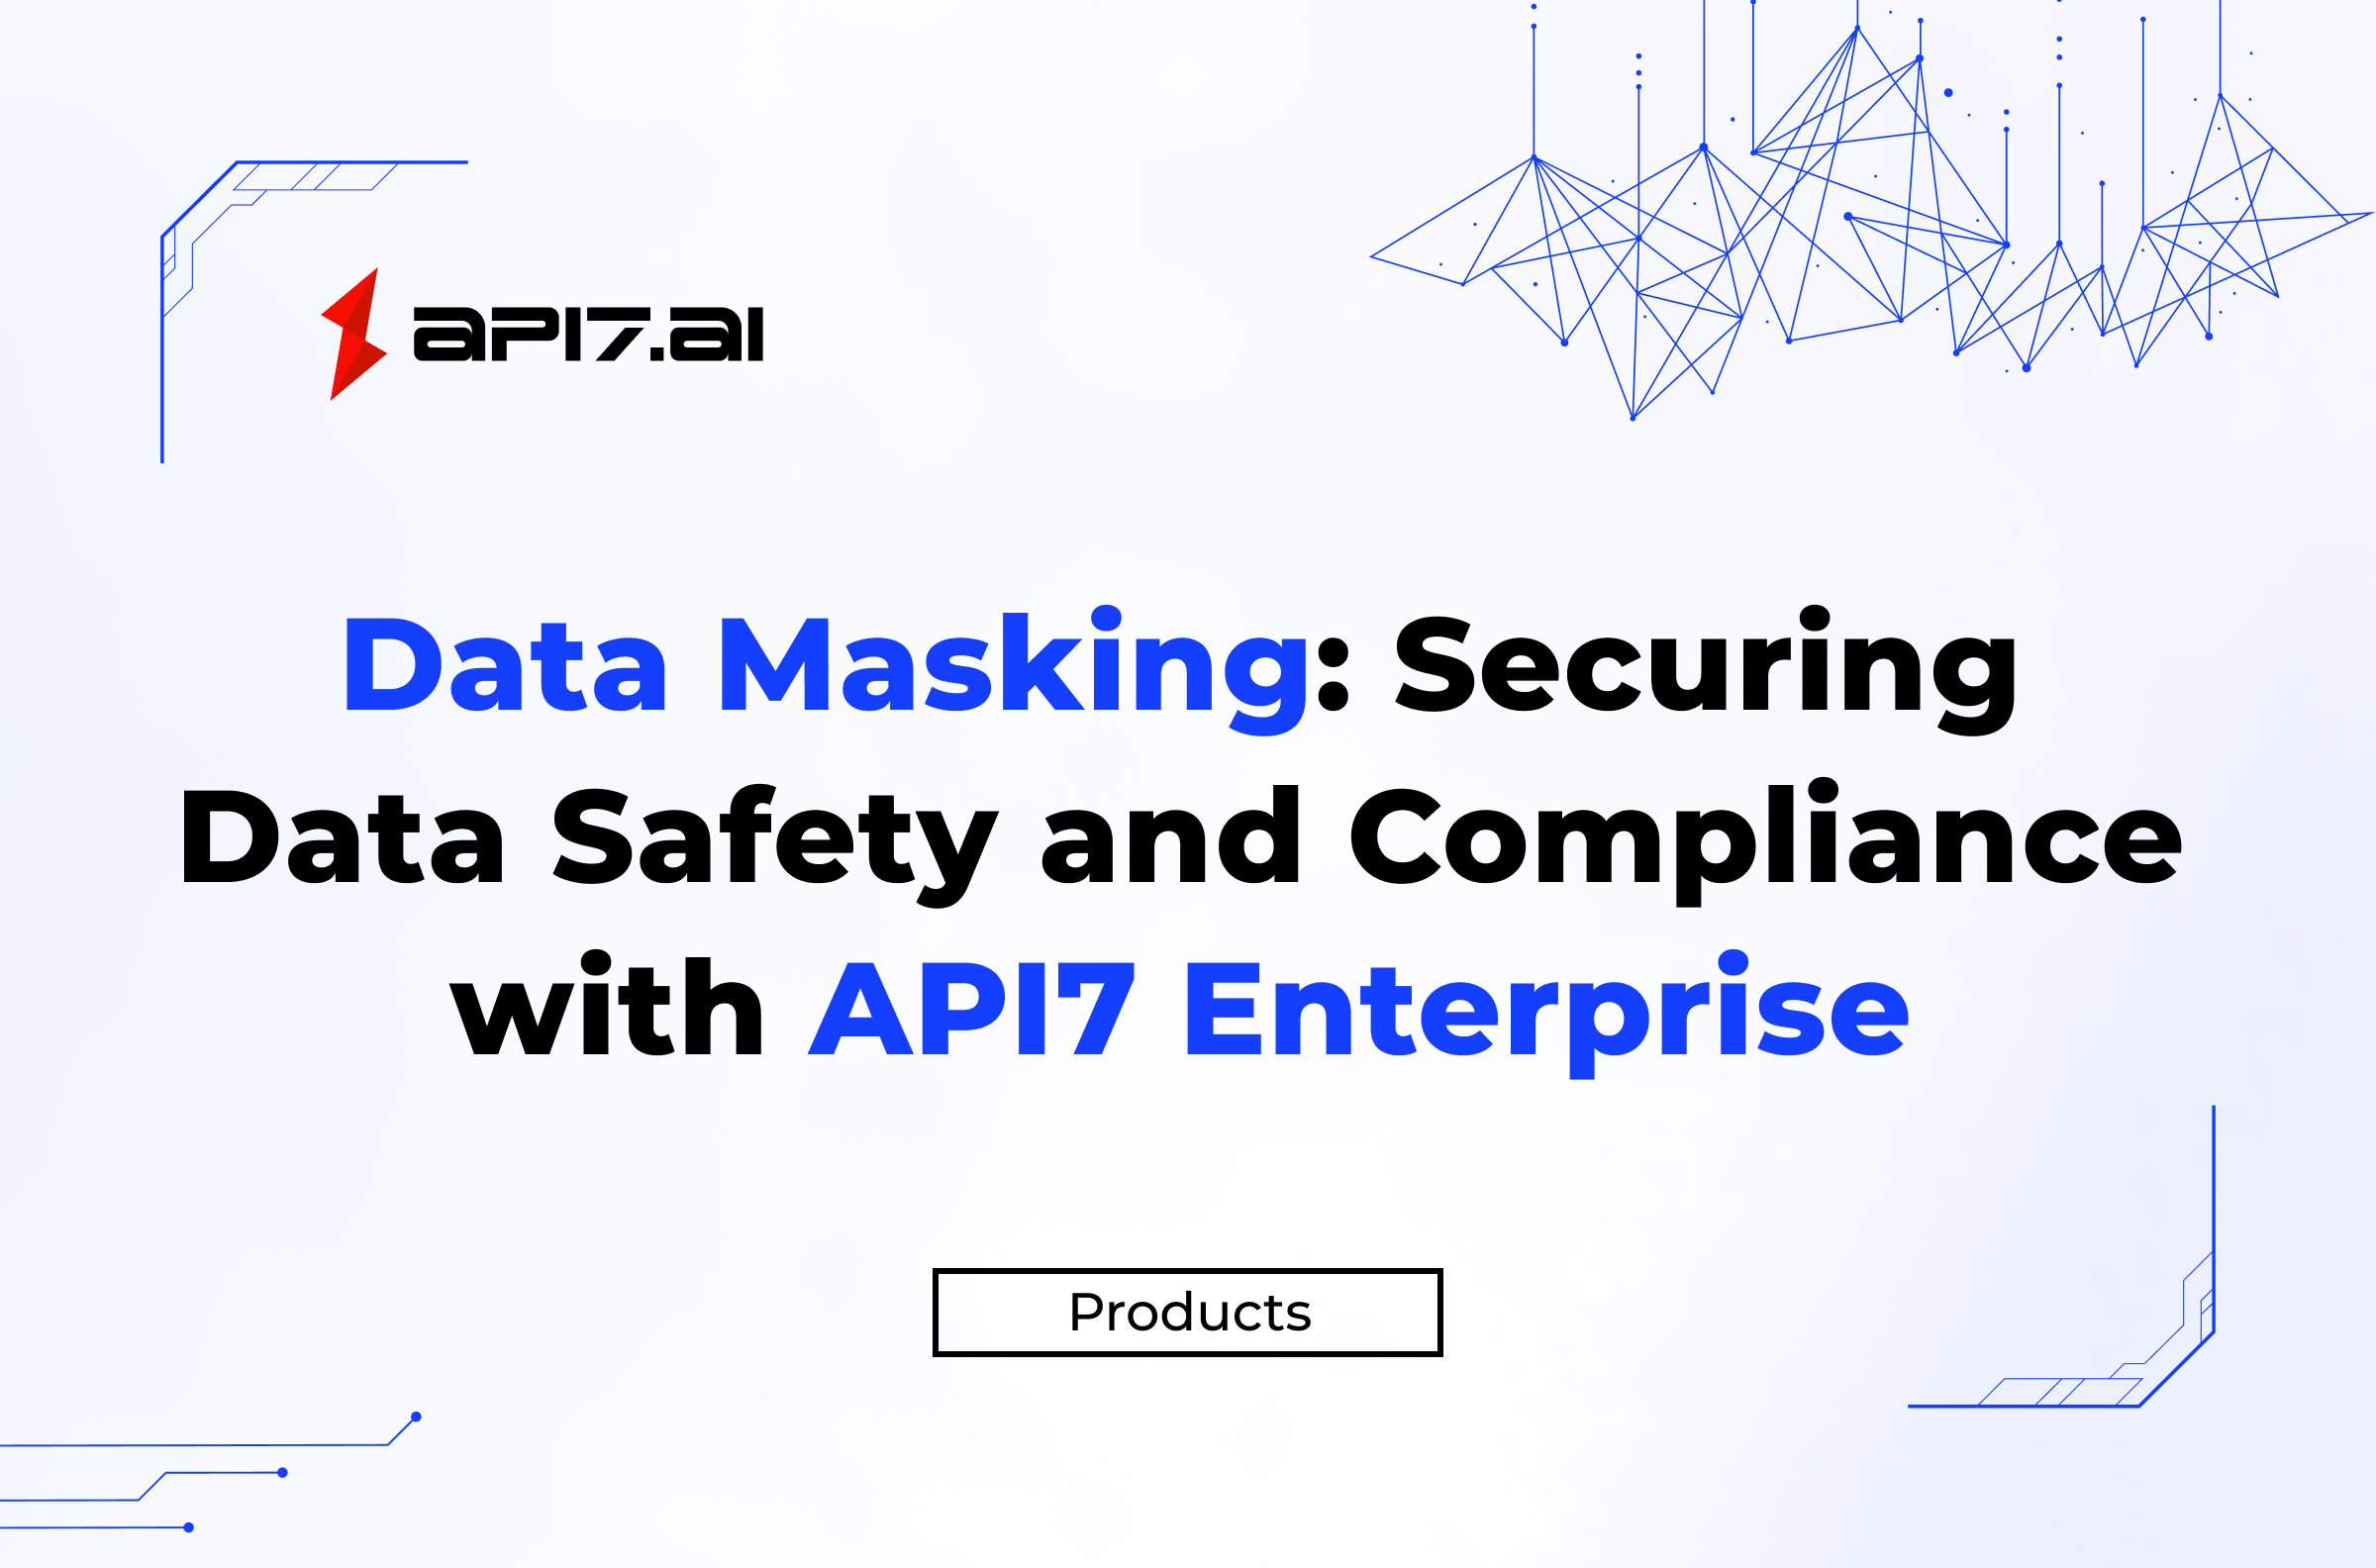 Data Masking: Securing Data Safety and Compliance with API7 Enterprise